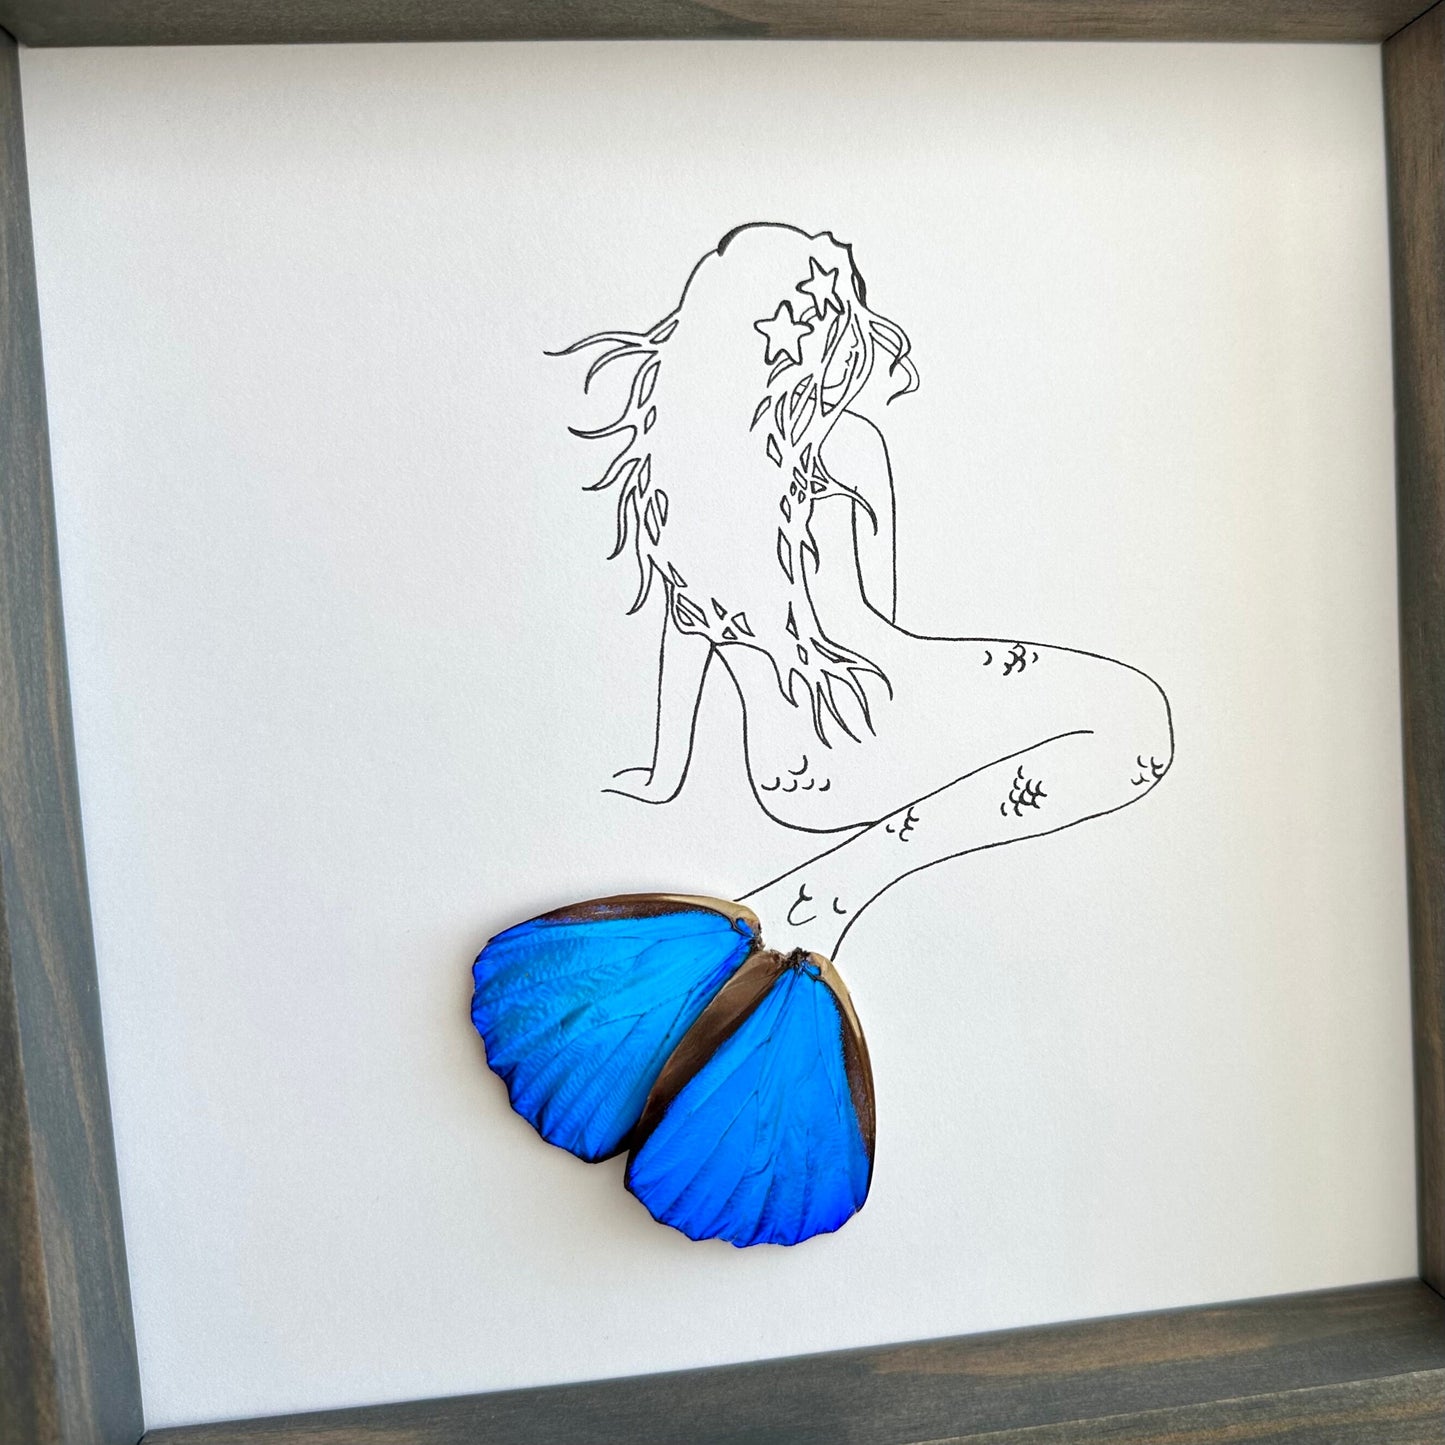 Mermaid Real Butterfly Wing Framed Art Ethically Sourced Made in MN USA - Holly Ulm - Isms Butterfly Conservation Art